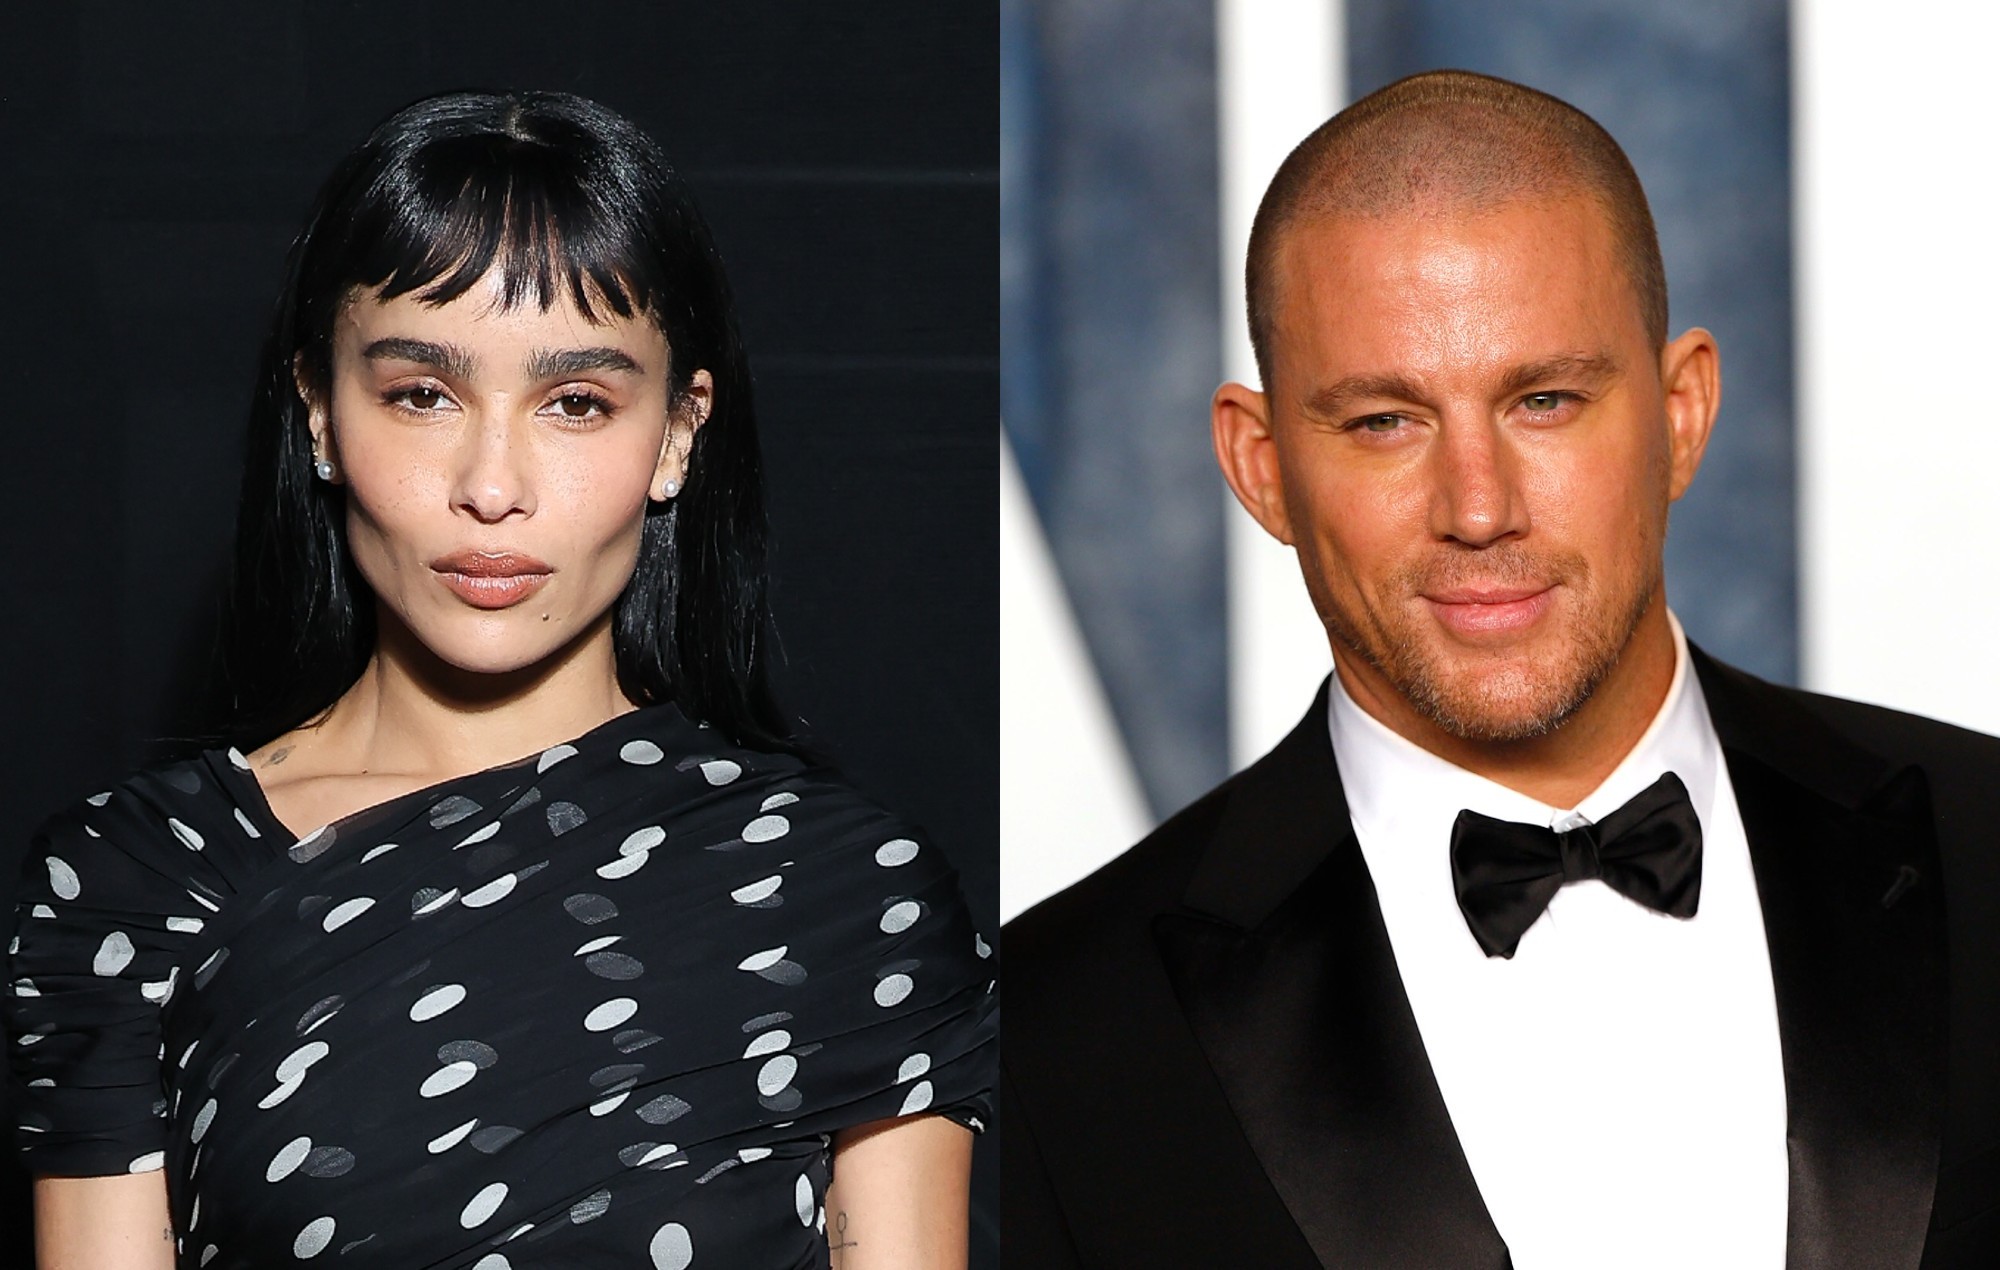 Zoë Kravitz and Channing Tatum are reportedly engaged